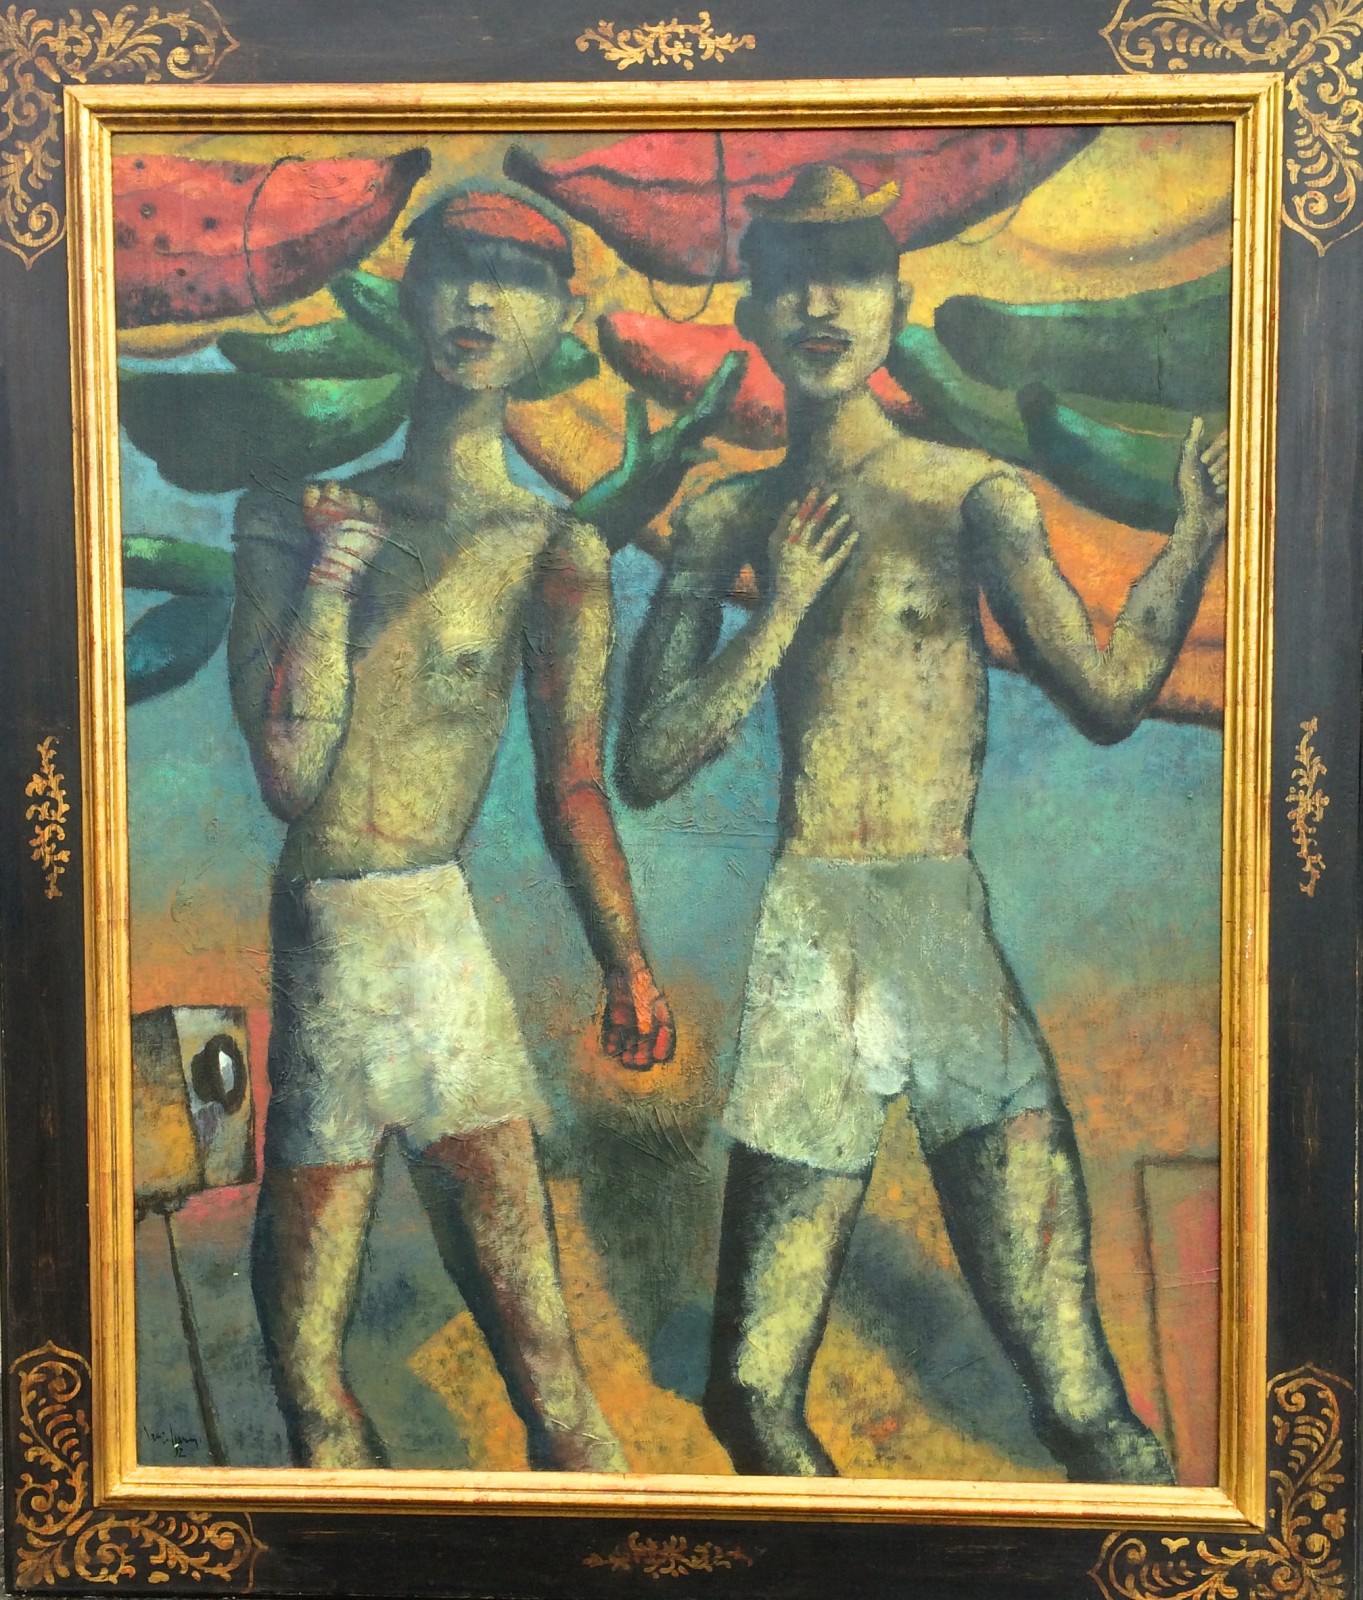 Erwin Guillermo (Guatemala, 1951- ) "Pugilistas" 1991 oil on canvas 43"x36" with the frame 56"x48"